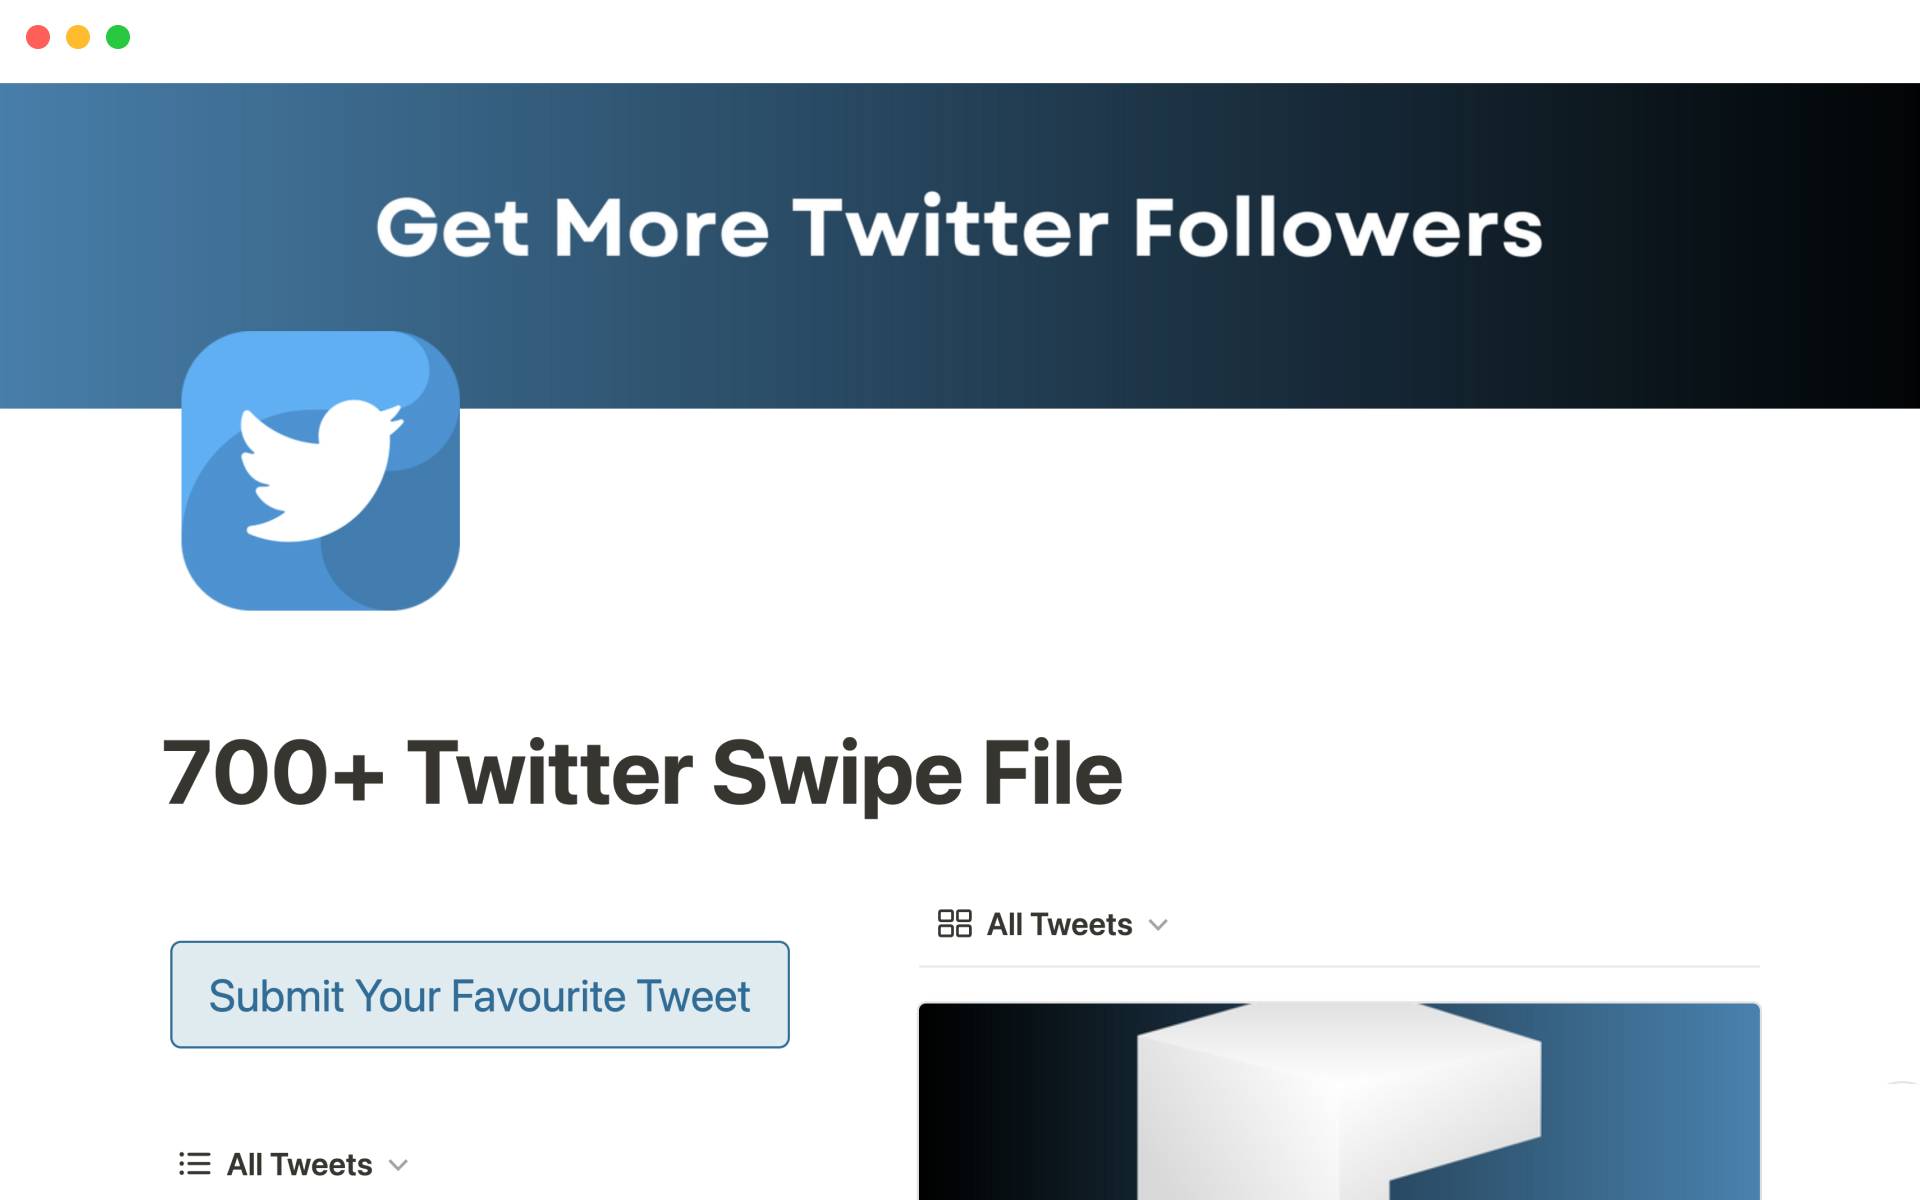 The swipe file contains 700+ tweets that people posted so you can rewrite them in your own niche.